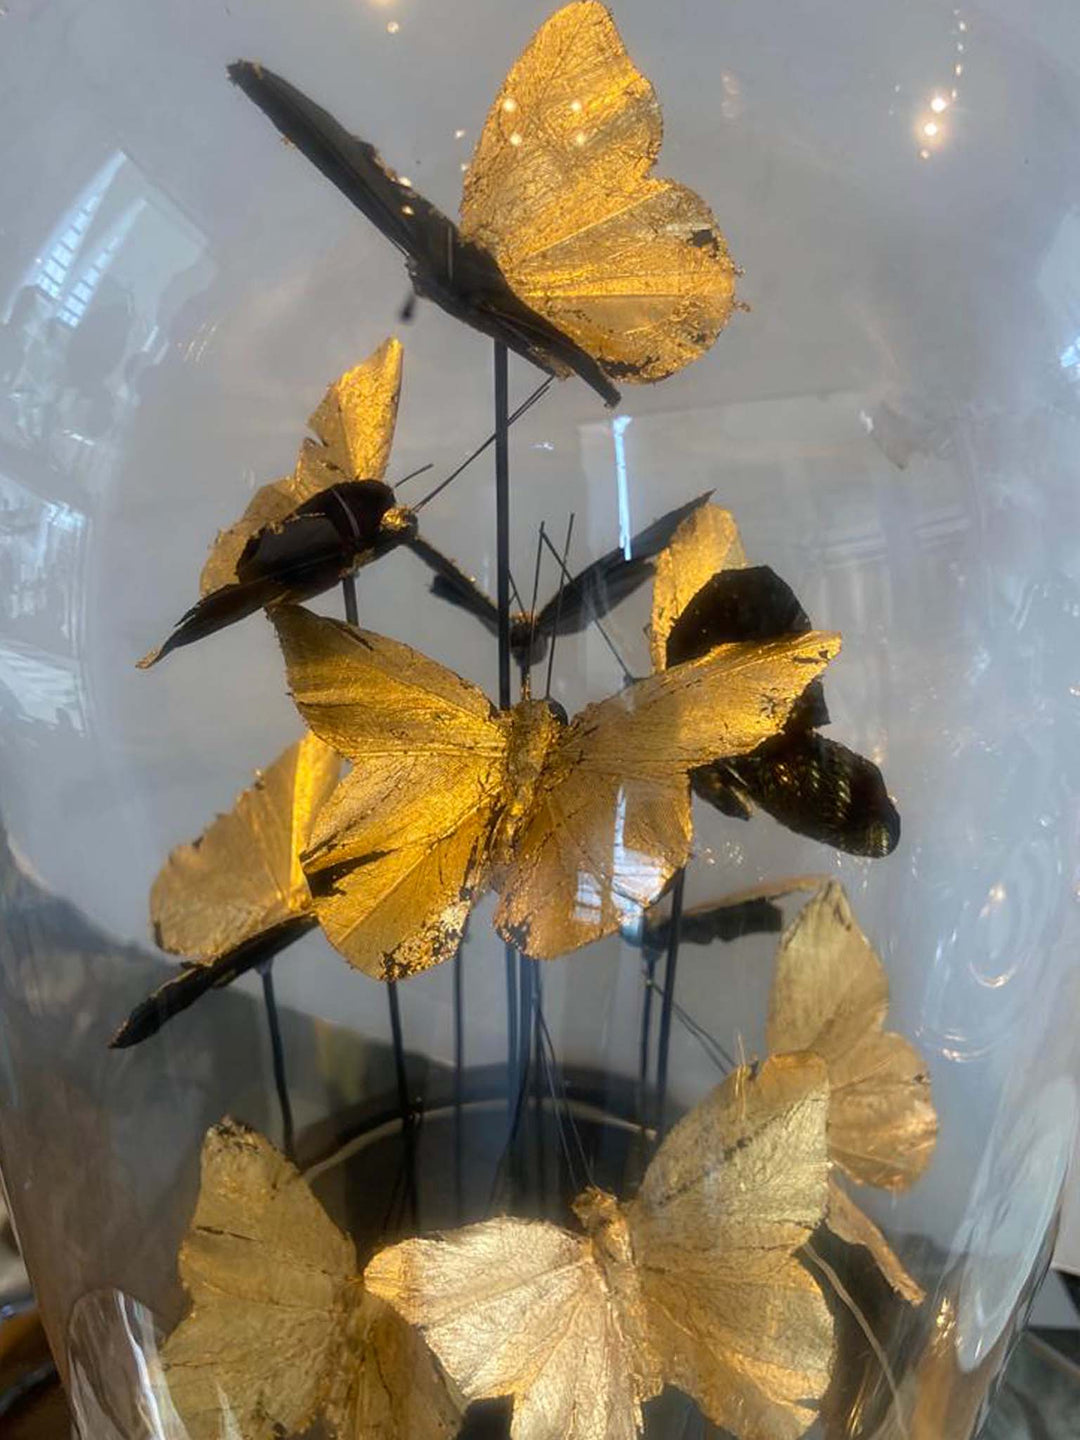 Golden butterfly on a glass dome